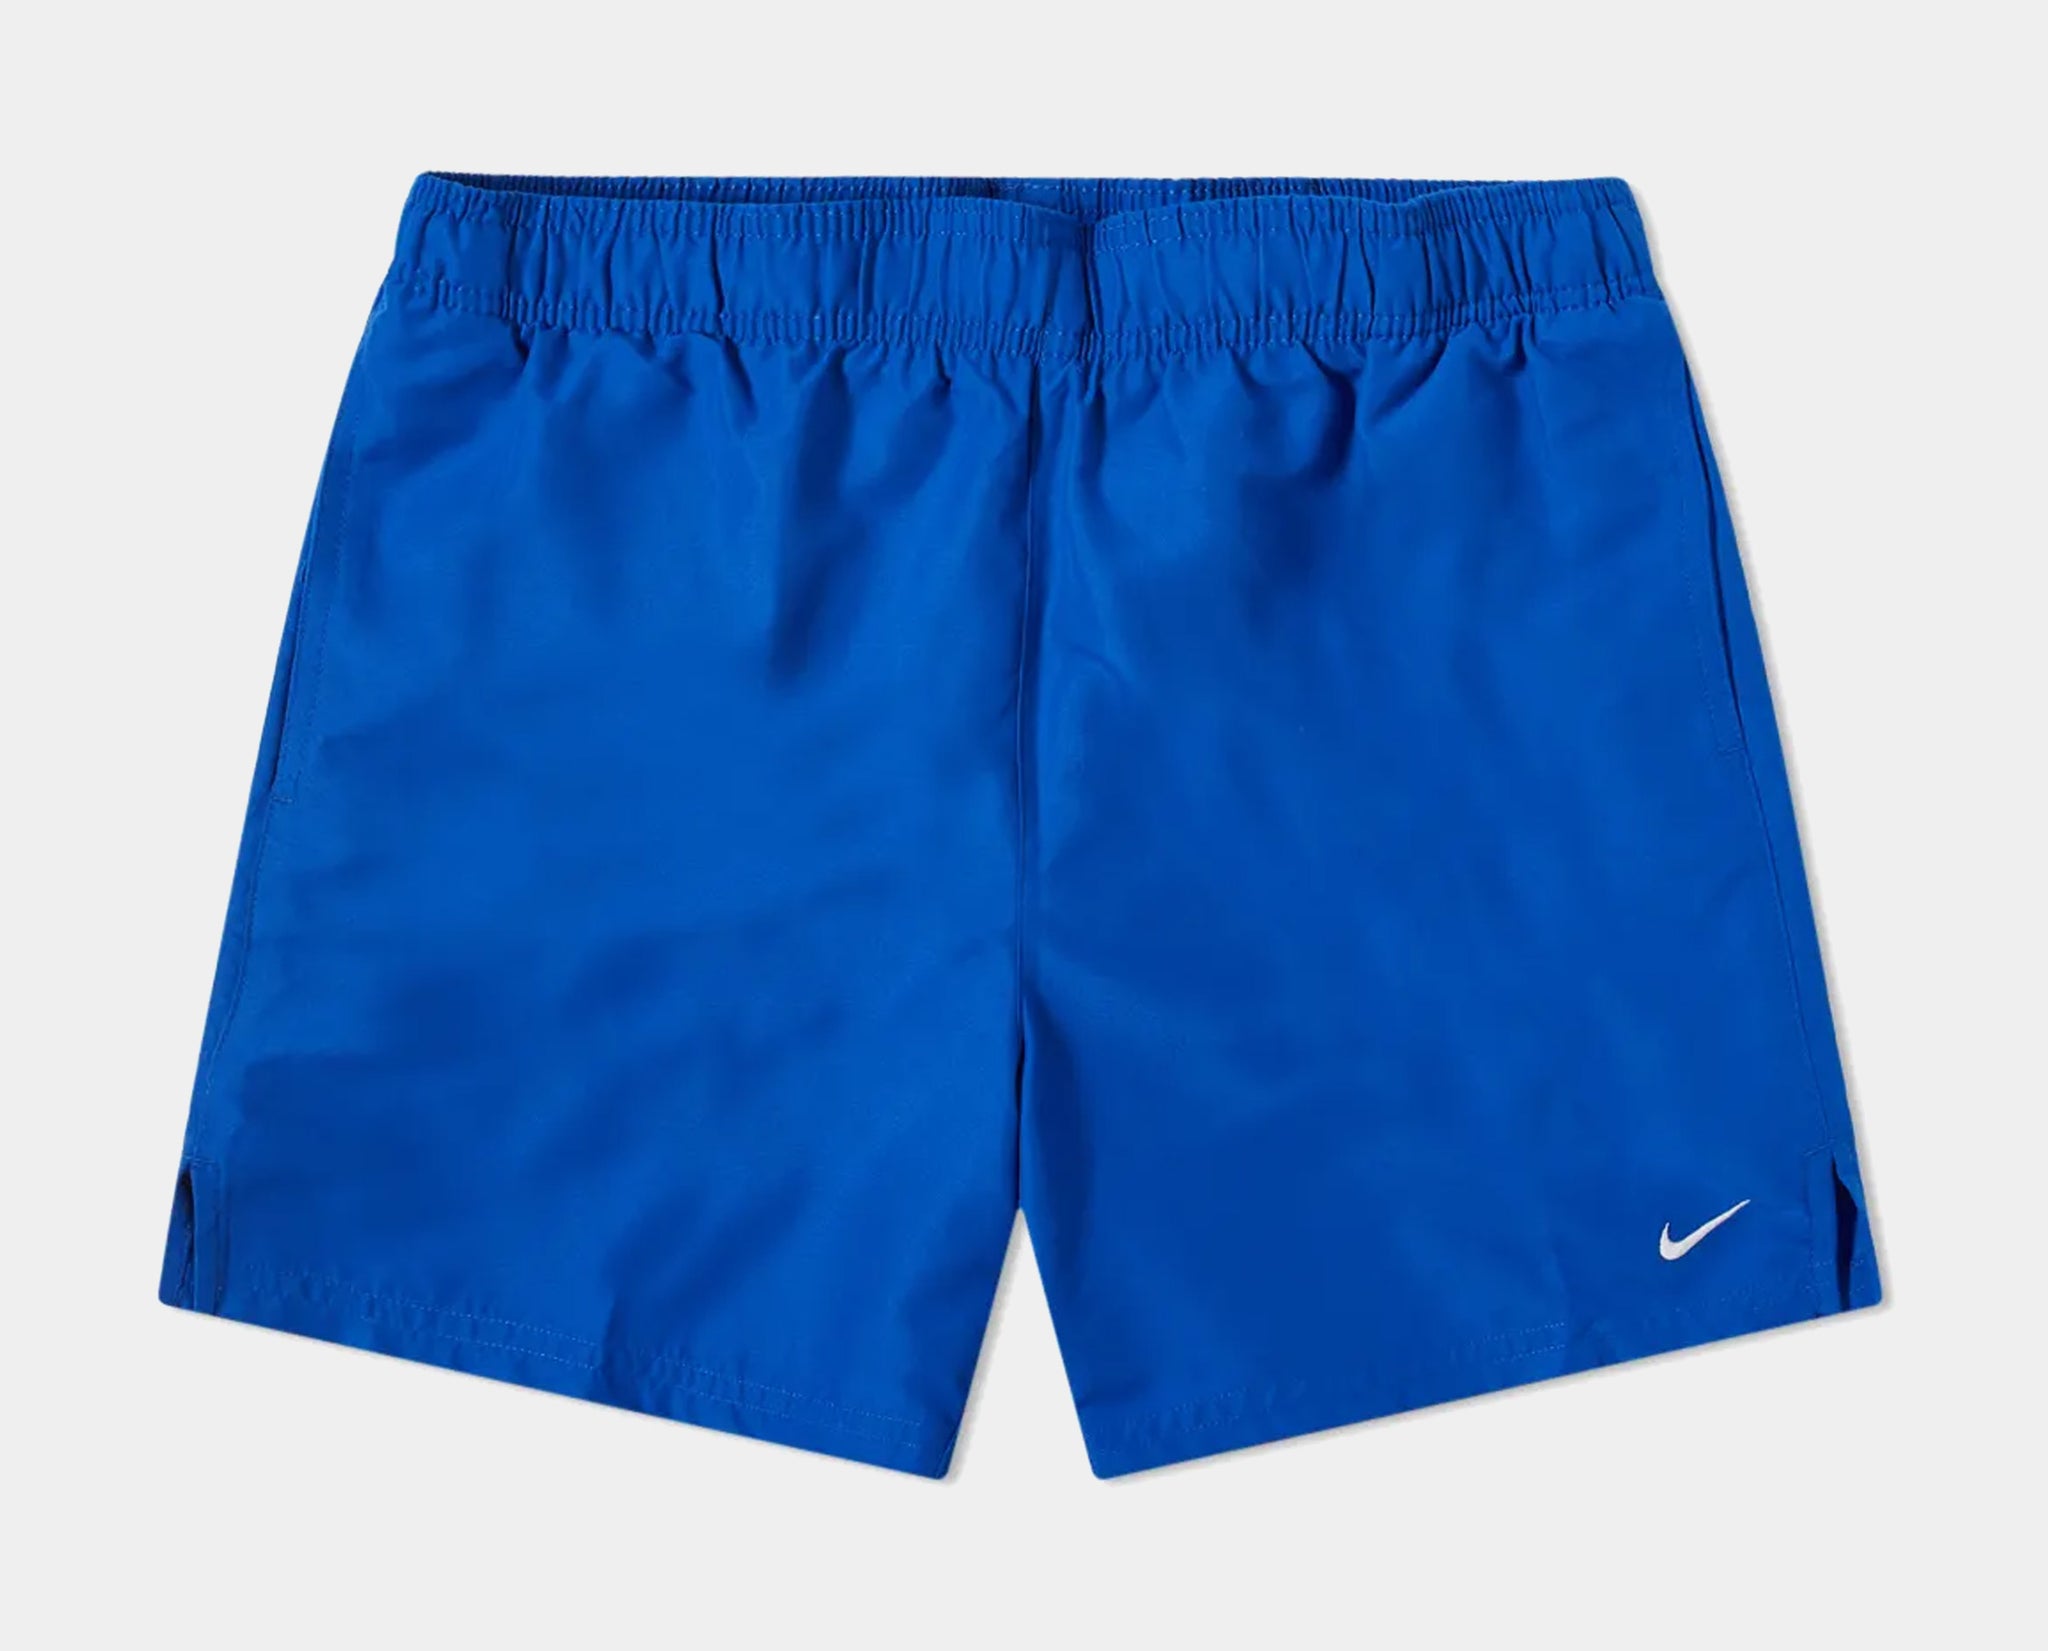 Nike Essential 7 Volley Short Mens Shorts Blue NESSA559-494 – Shoe Palace